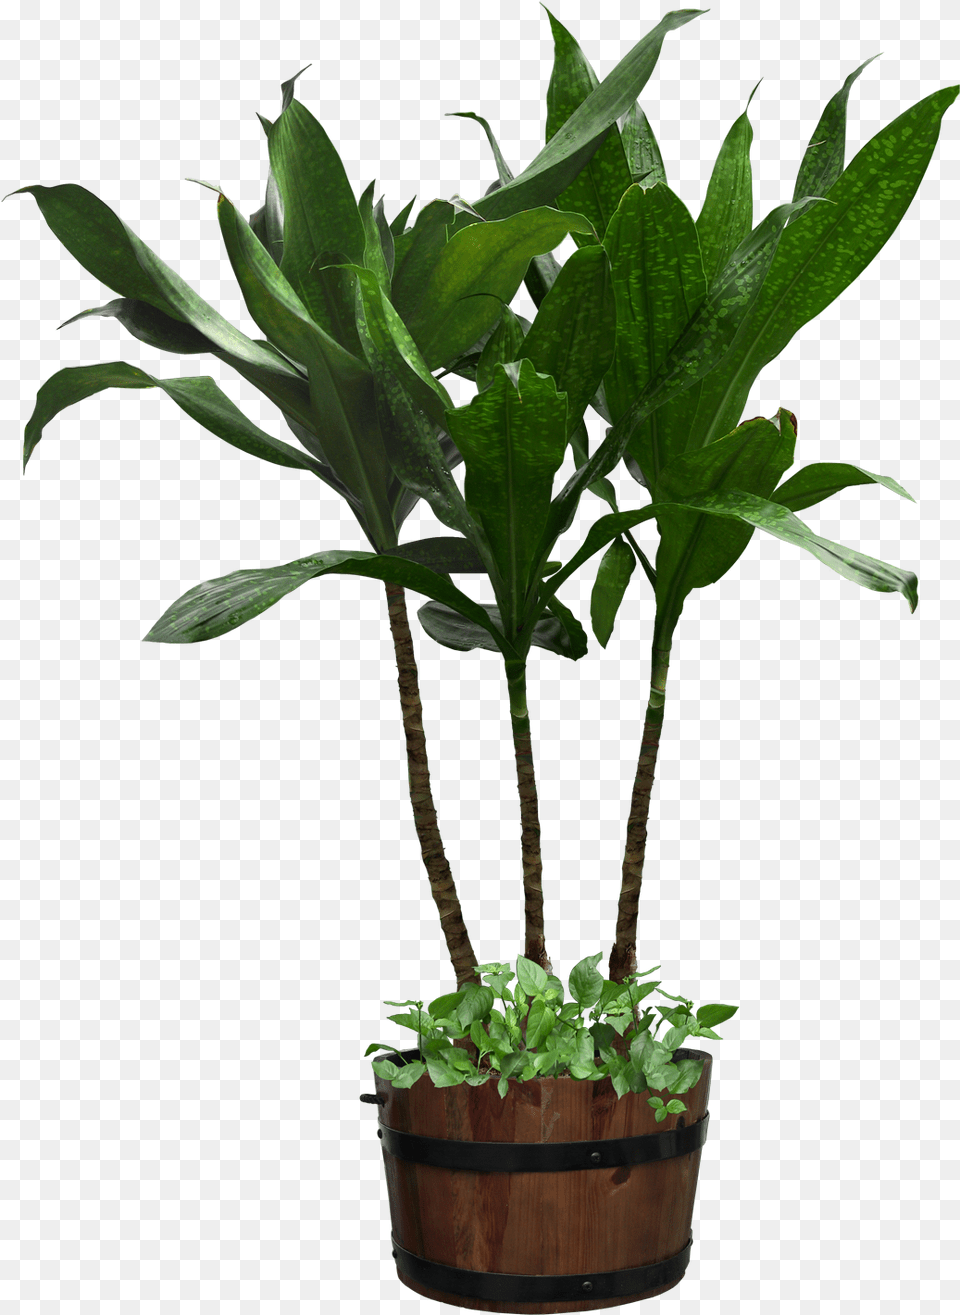 Potted Plant Download Clipart Potted Plant Background, Leaf, Potted Plant, Tree, Jar Free Transparent Png